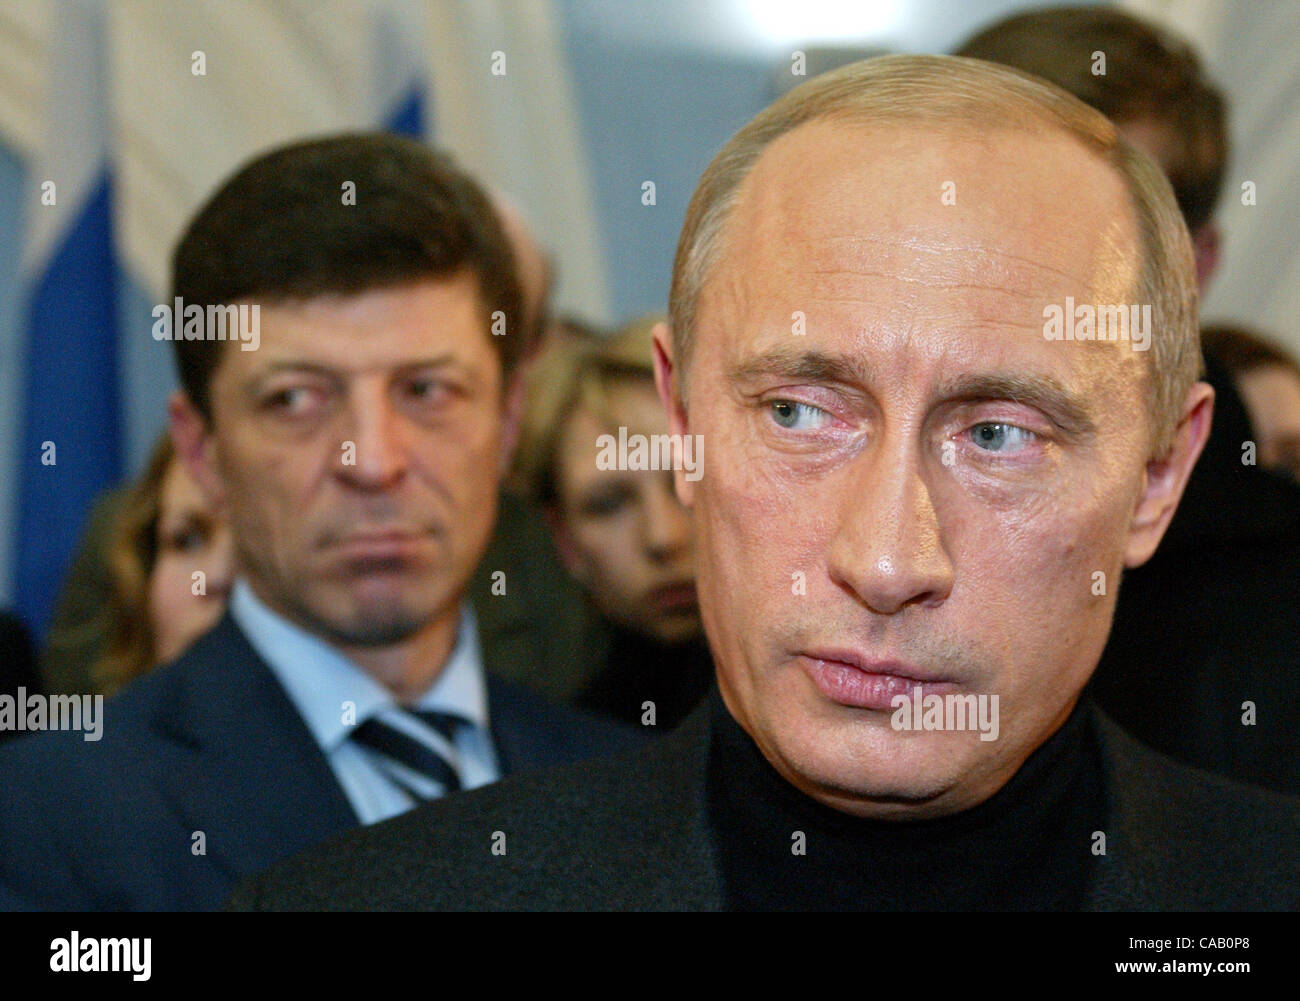 The president of Russia Vladimir Putin (on the right) and Dmitry Kozak in night of elections in an elective staff. (Credit Image: © PhotoXpress/ZUMA Press) RESTRICTIONS: North and South America Rights ONLY! Stock Photo